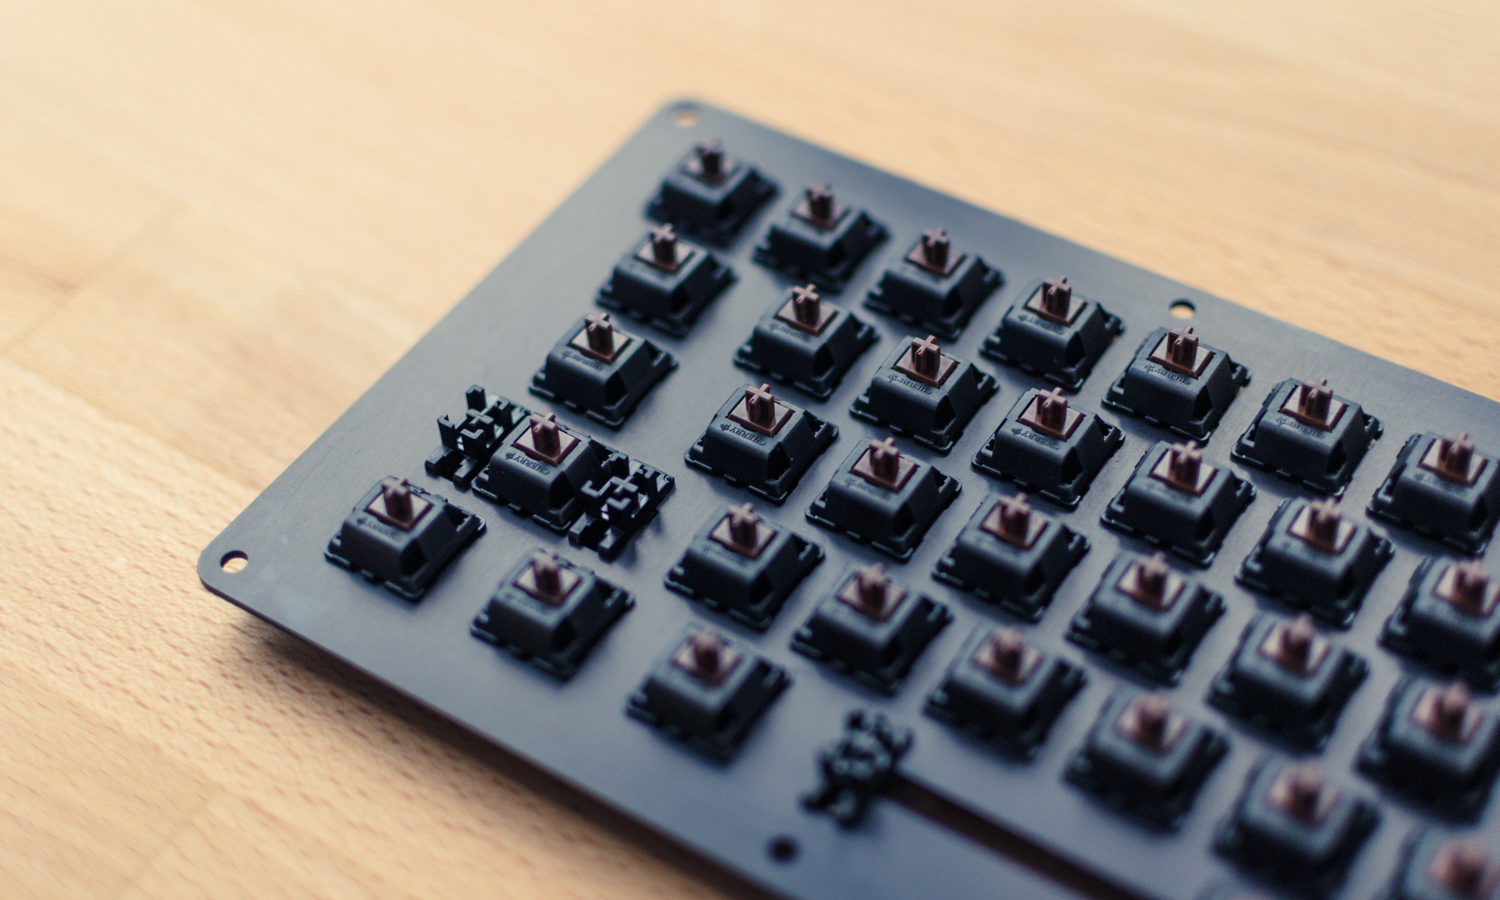 Black anodized Aluminium cover and bottom plates for 68Keys.io mechanical keyboard (Details, Close-Up)